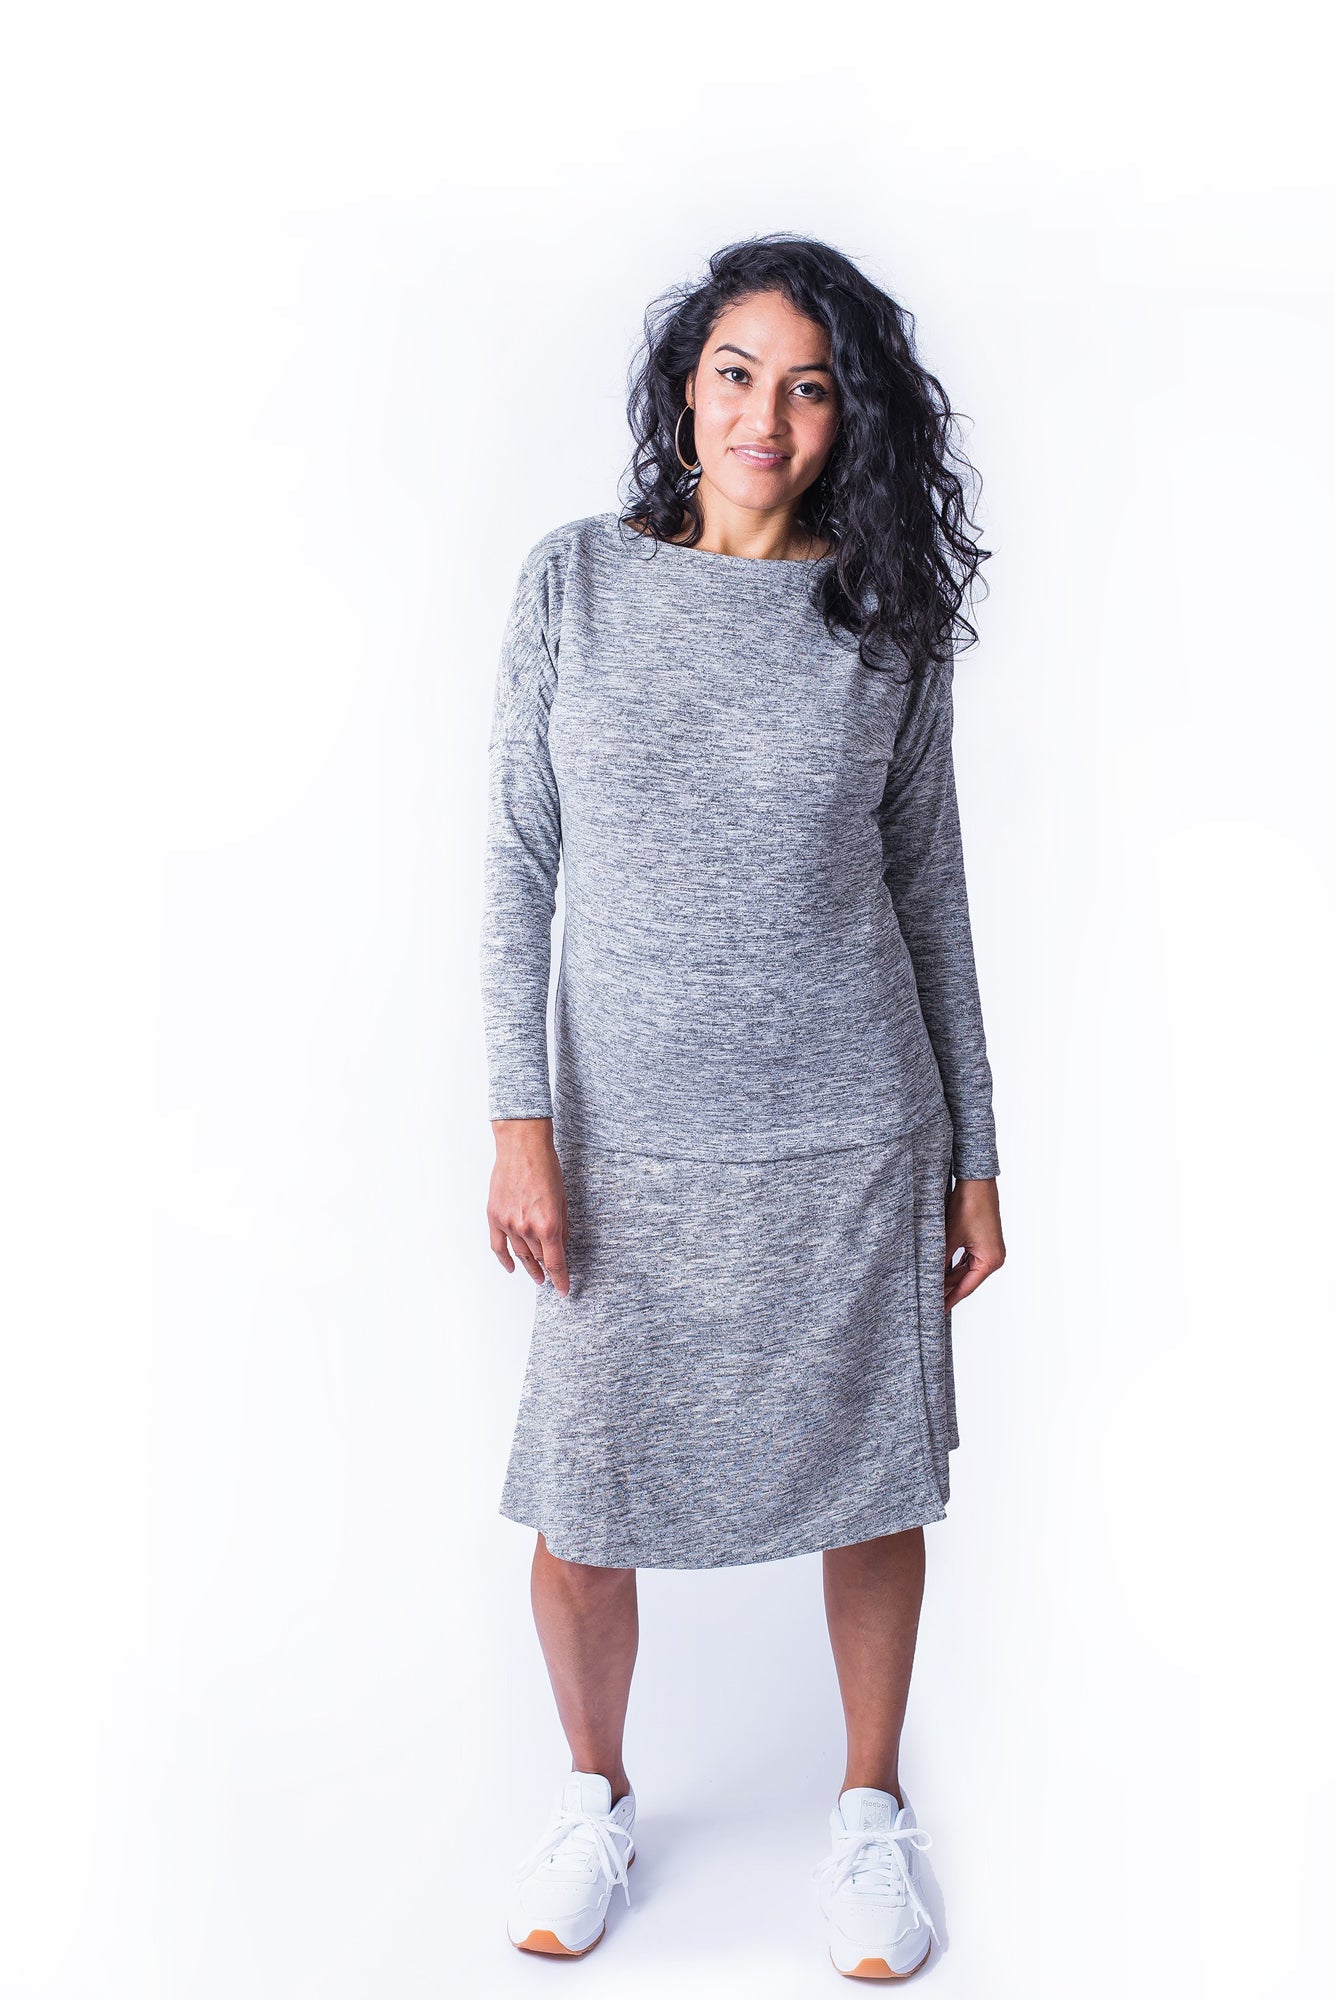 Woman wearing grey long sleeve top with shoulder snap closures and matching grey skirt.